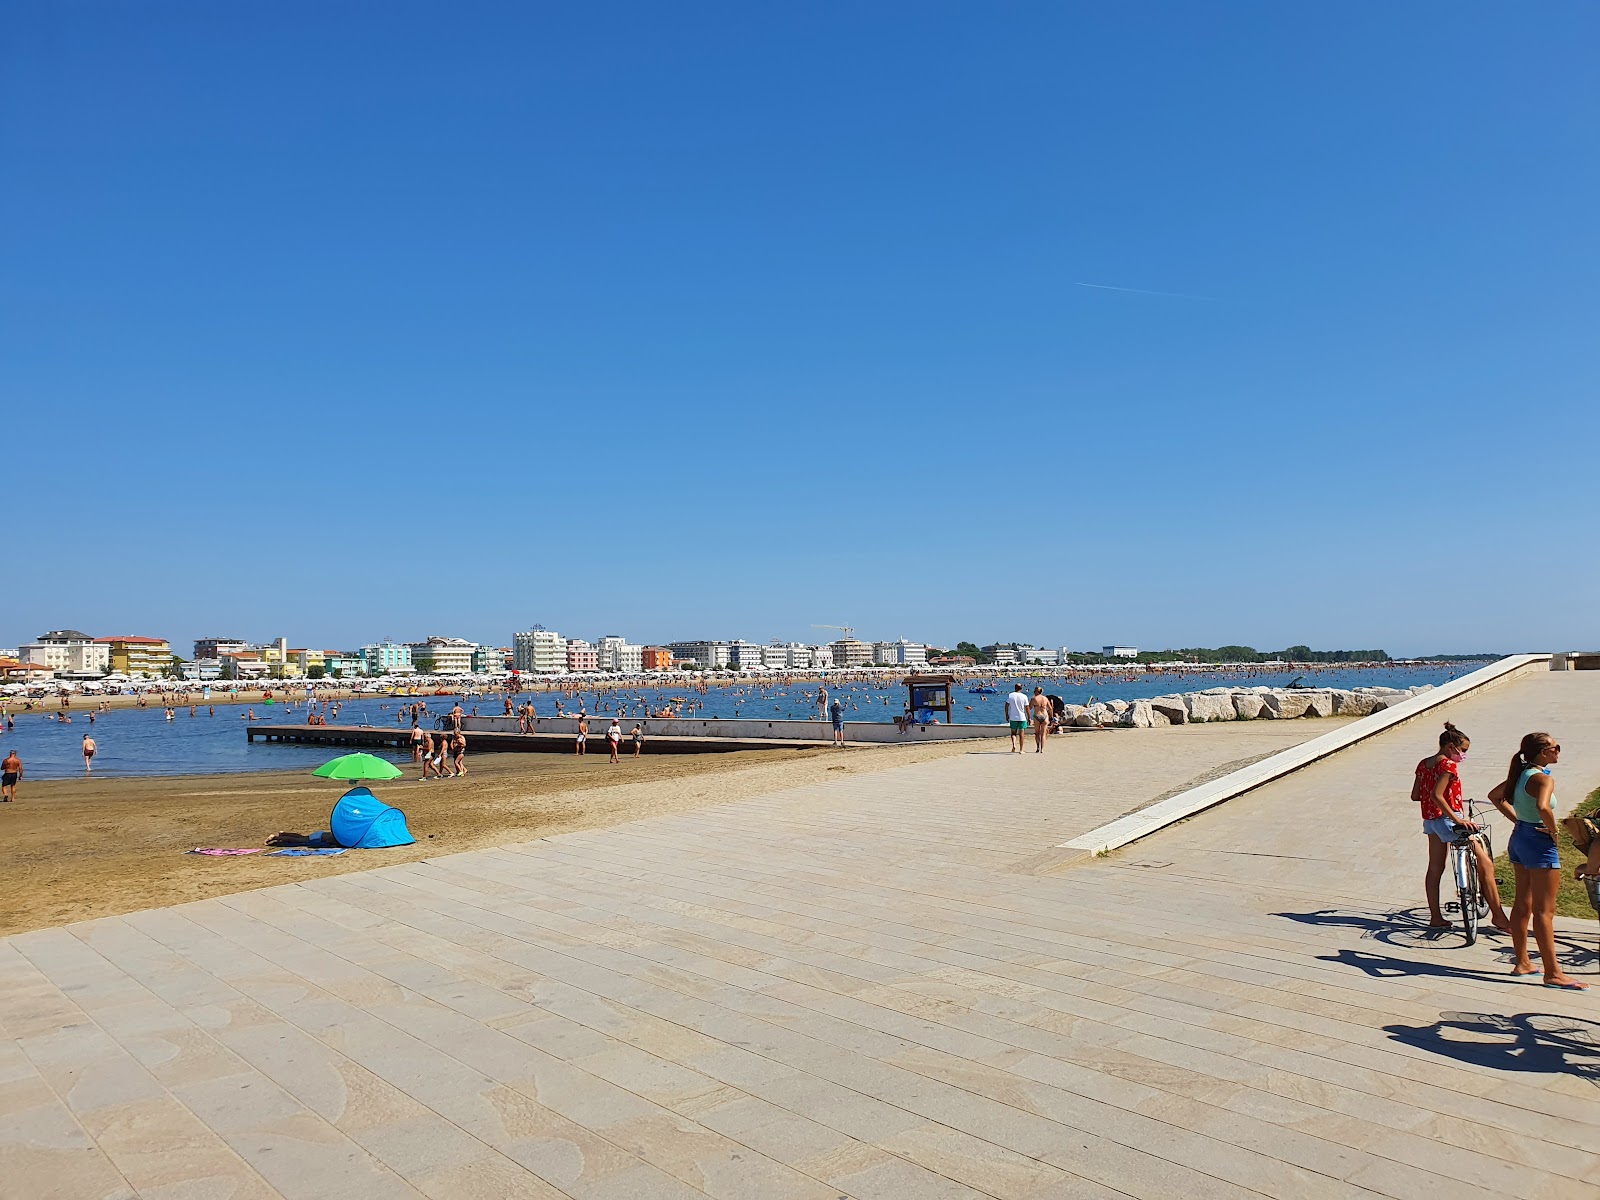 Photo of Spiaggia di Caorle - recommended for family travellers with kids